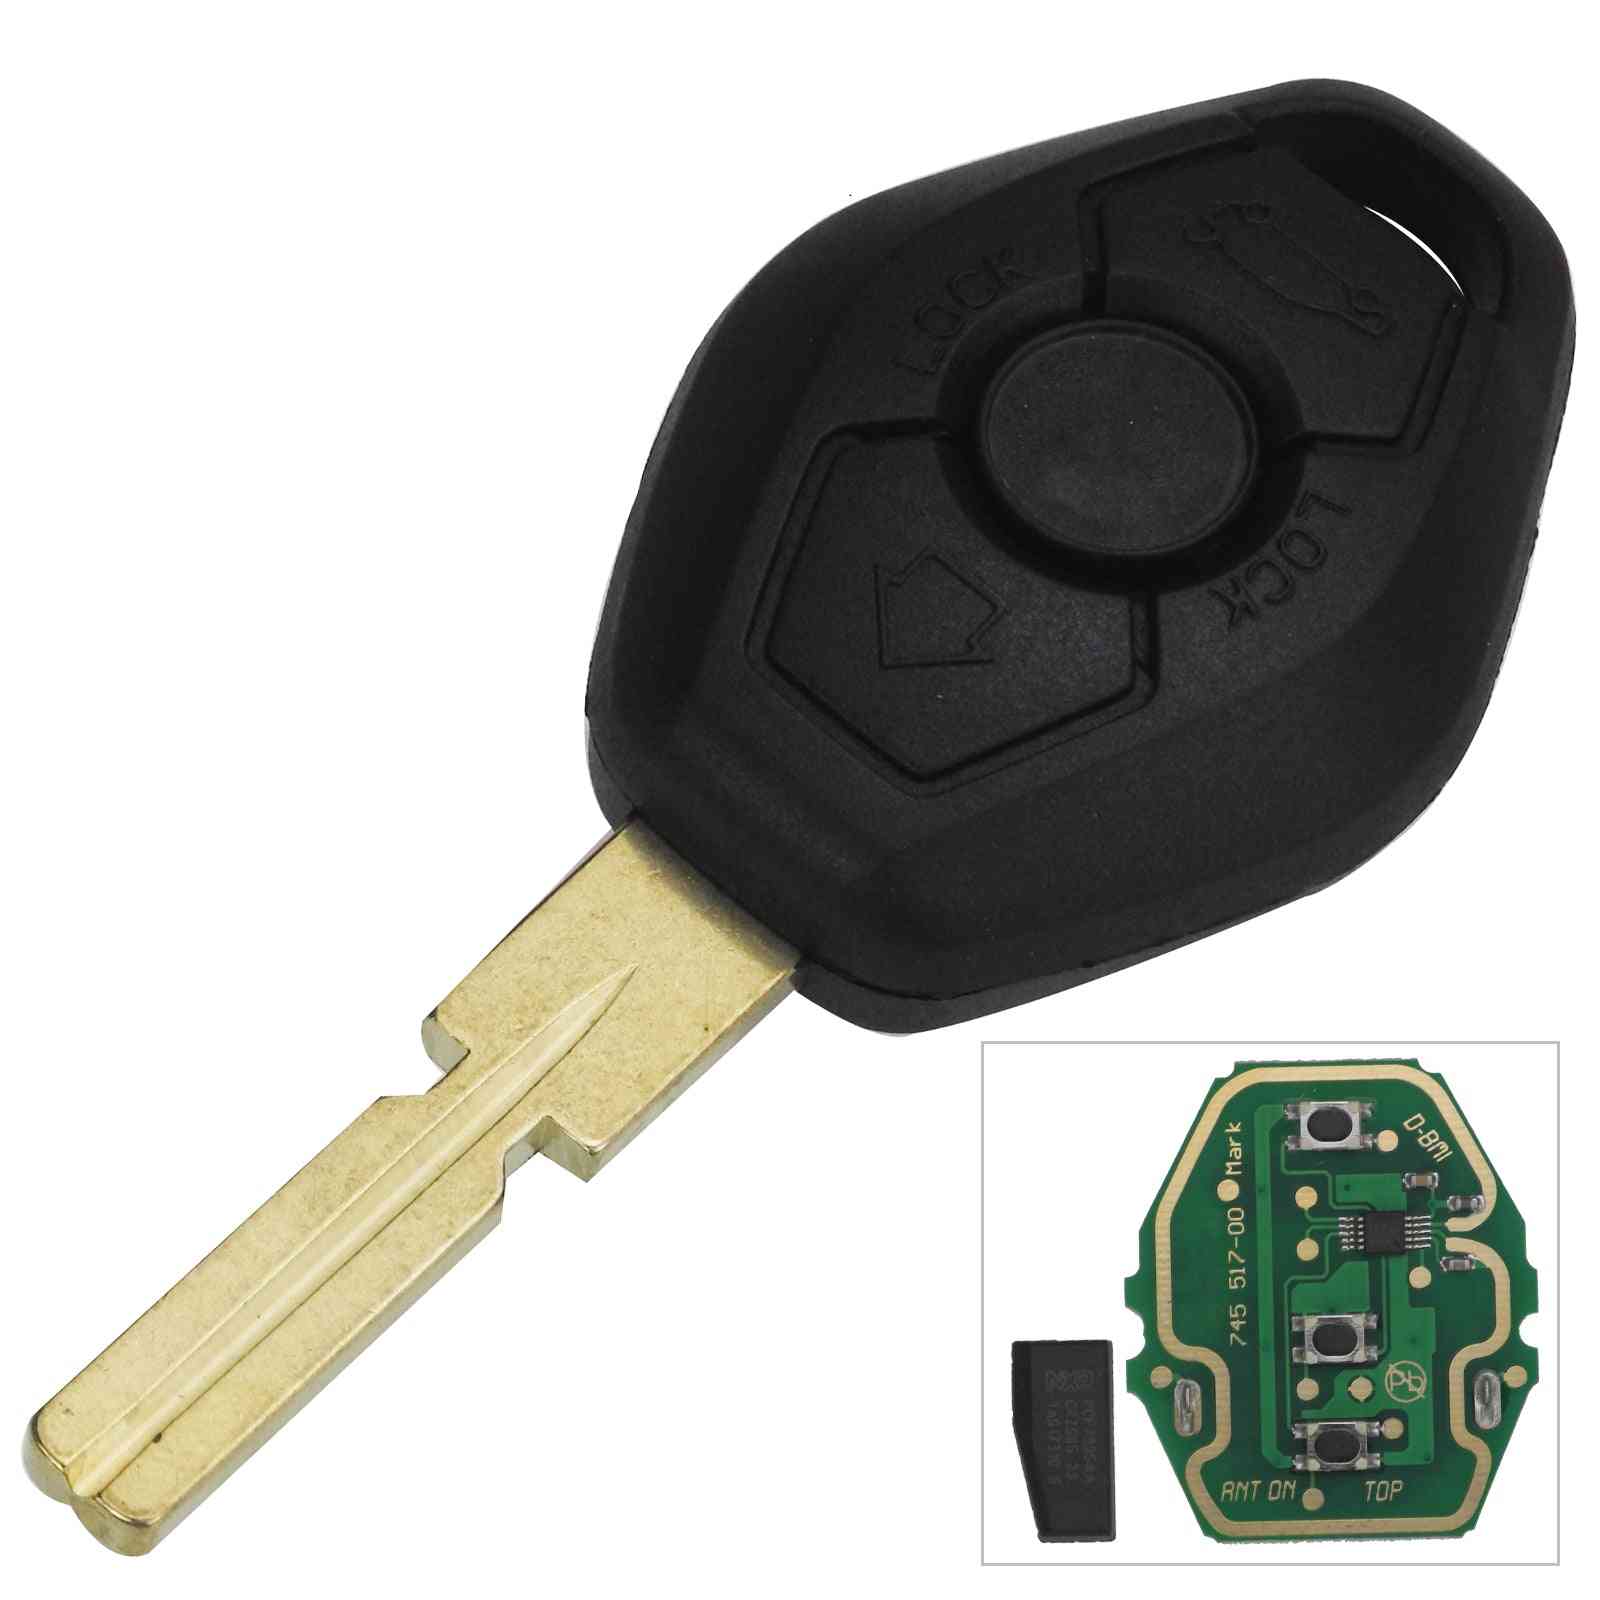 Id44 Chip Keyless Entry Transmitter, Remote Key For Car